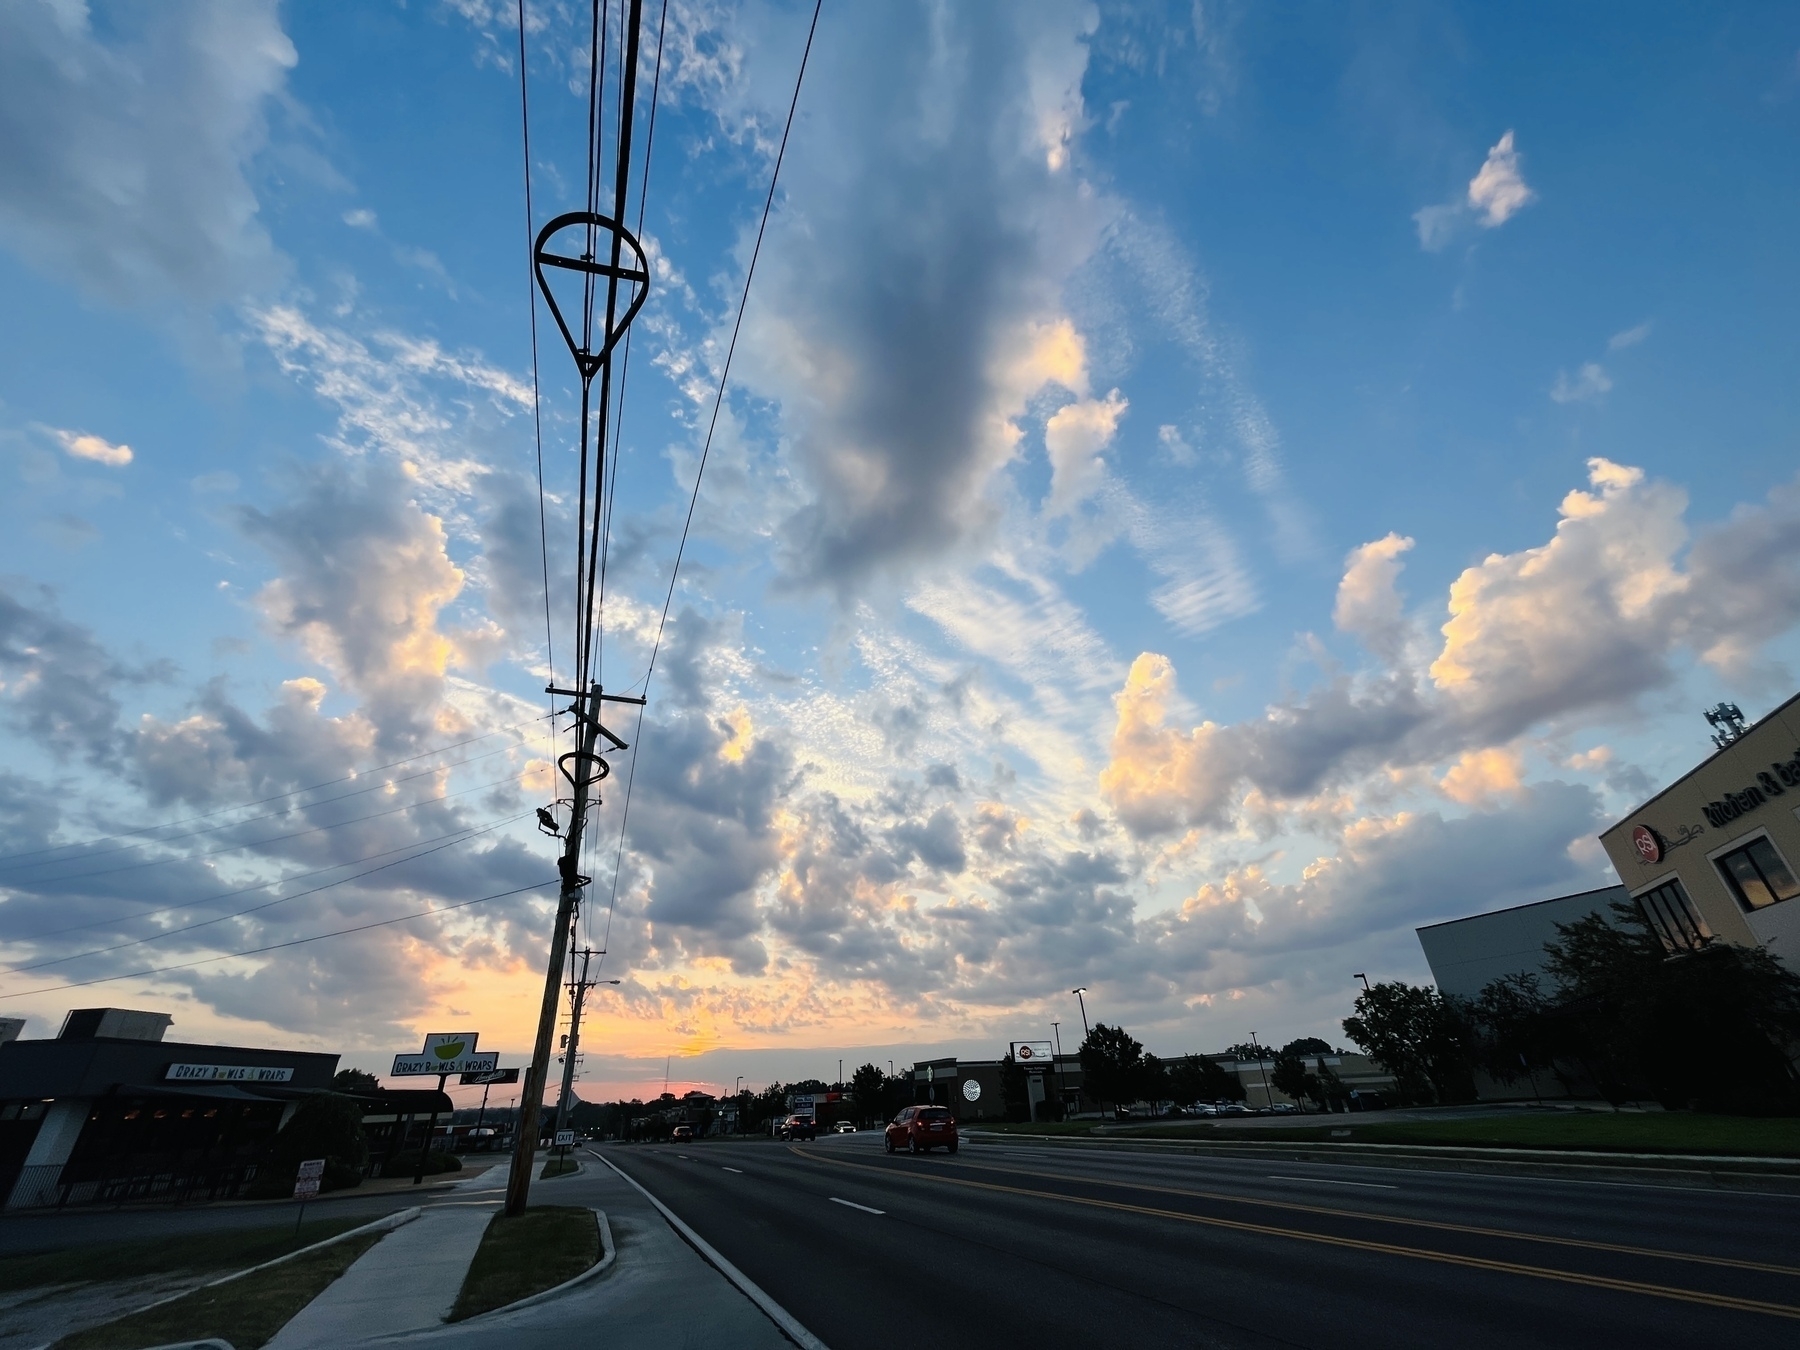 Blue skies with white clouds and orange sunrise over suburban road